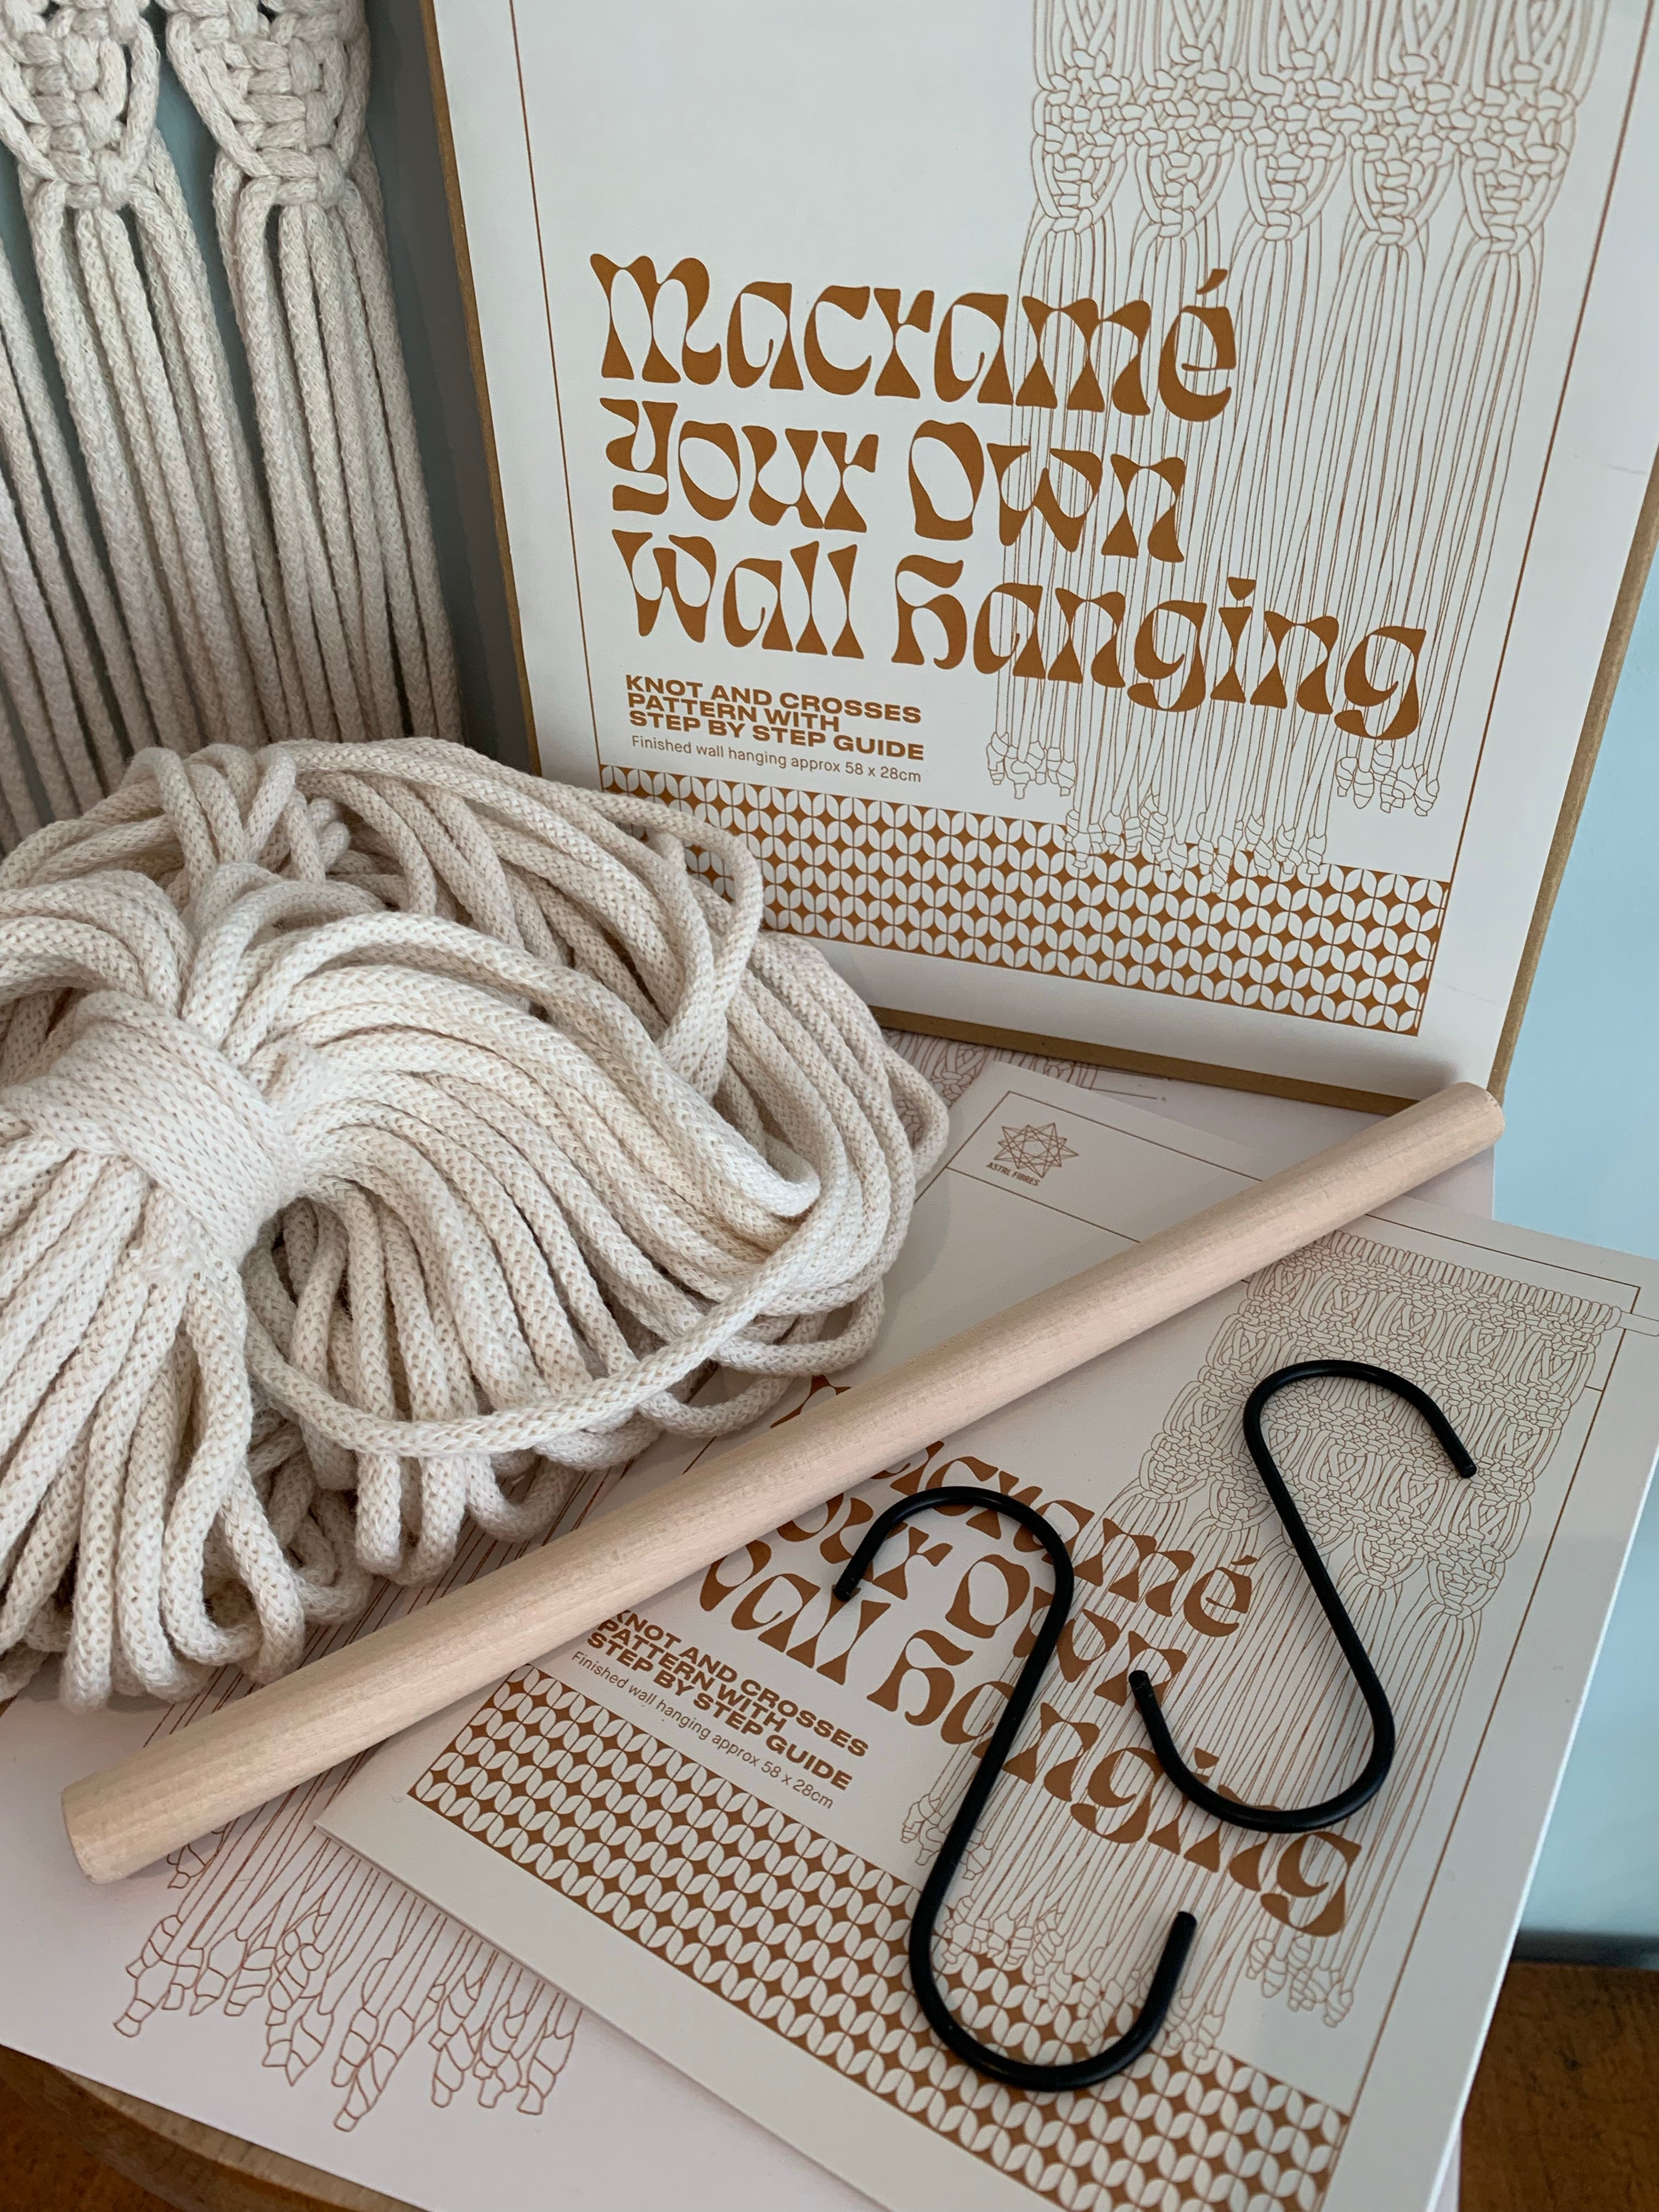 The Macramé Your Own Wall Hanging Kit